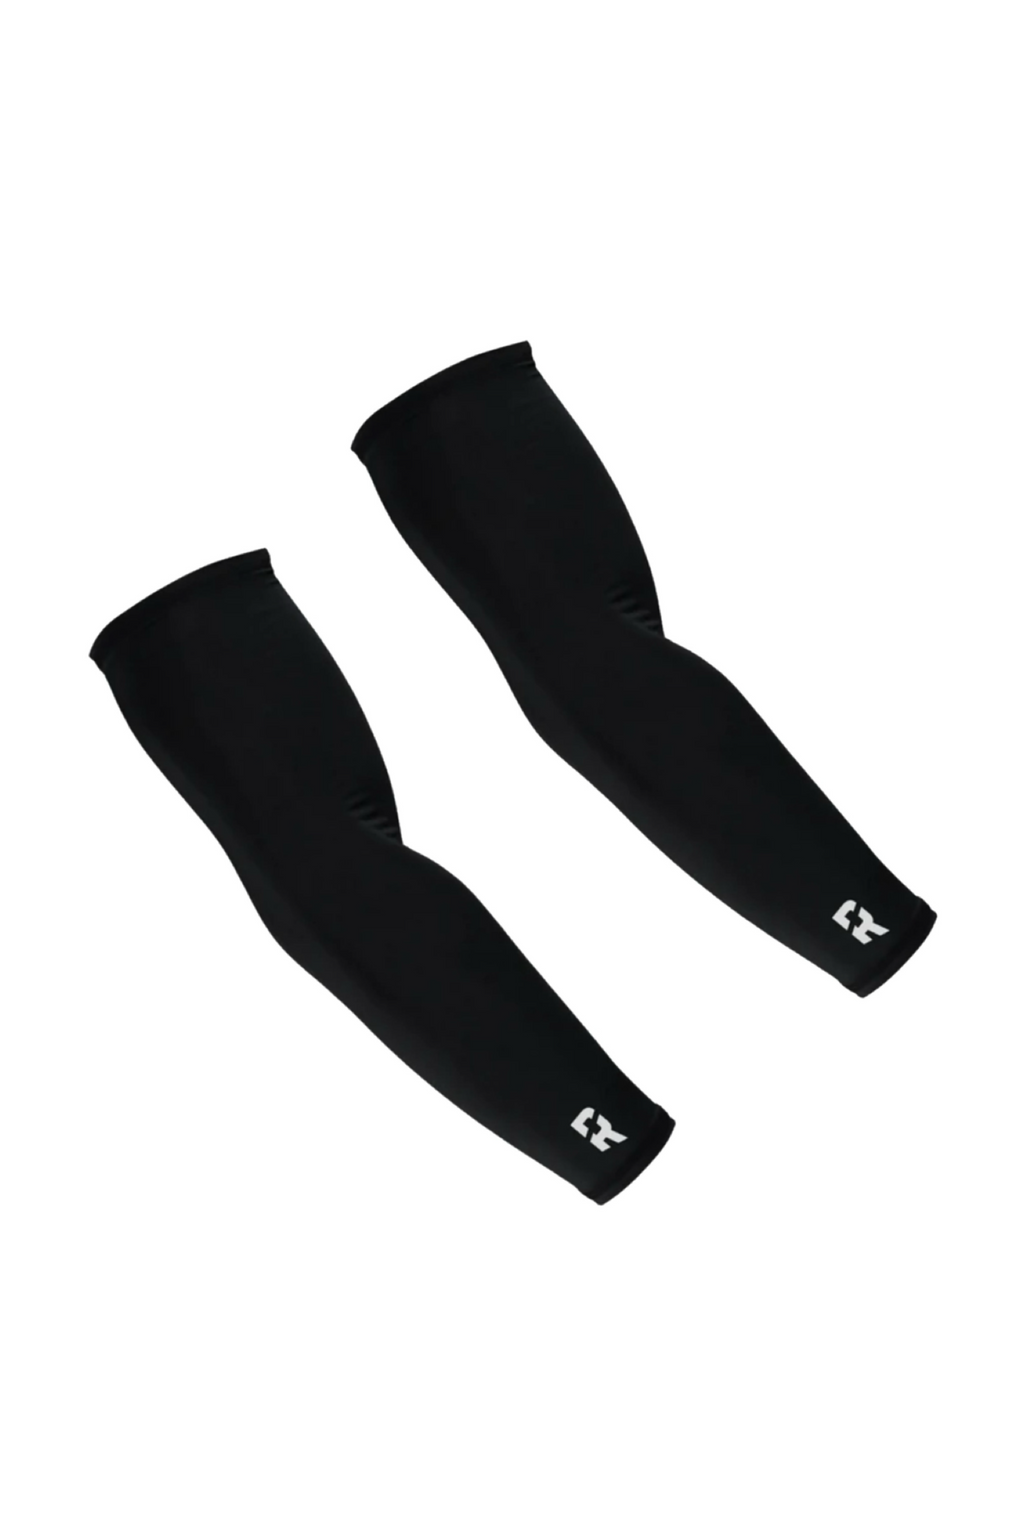 NYOrtho Geri-Sleeves Non-Compression Arm Sleeves for Men & Women with  Sensitive Skin, Medium